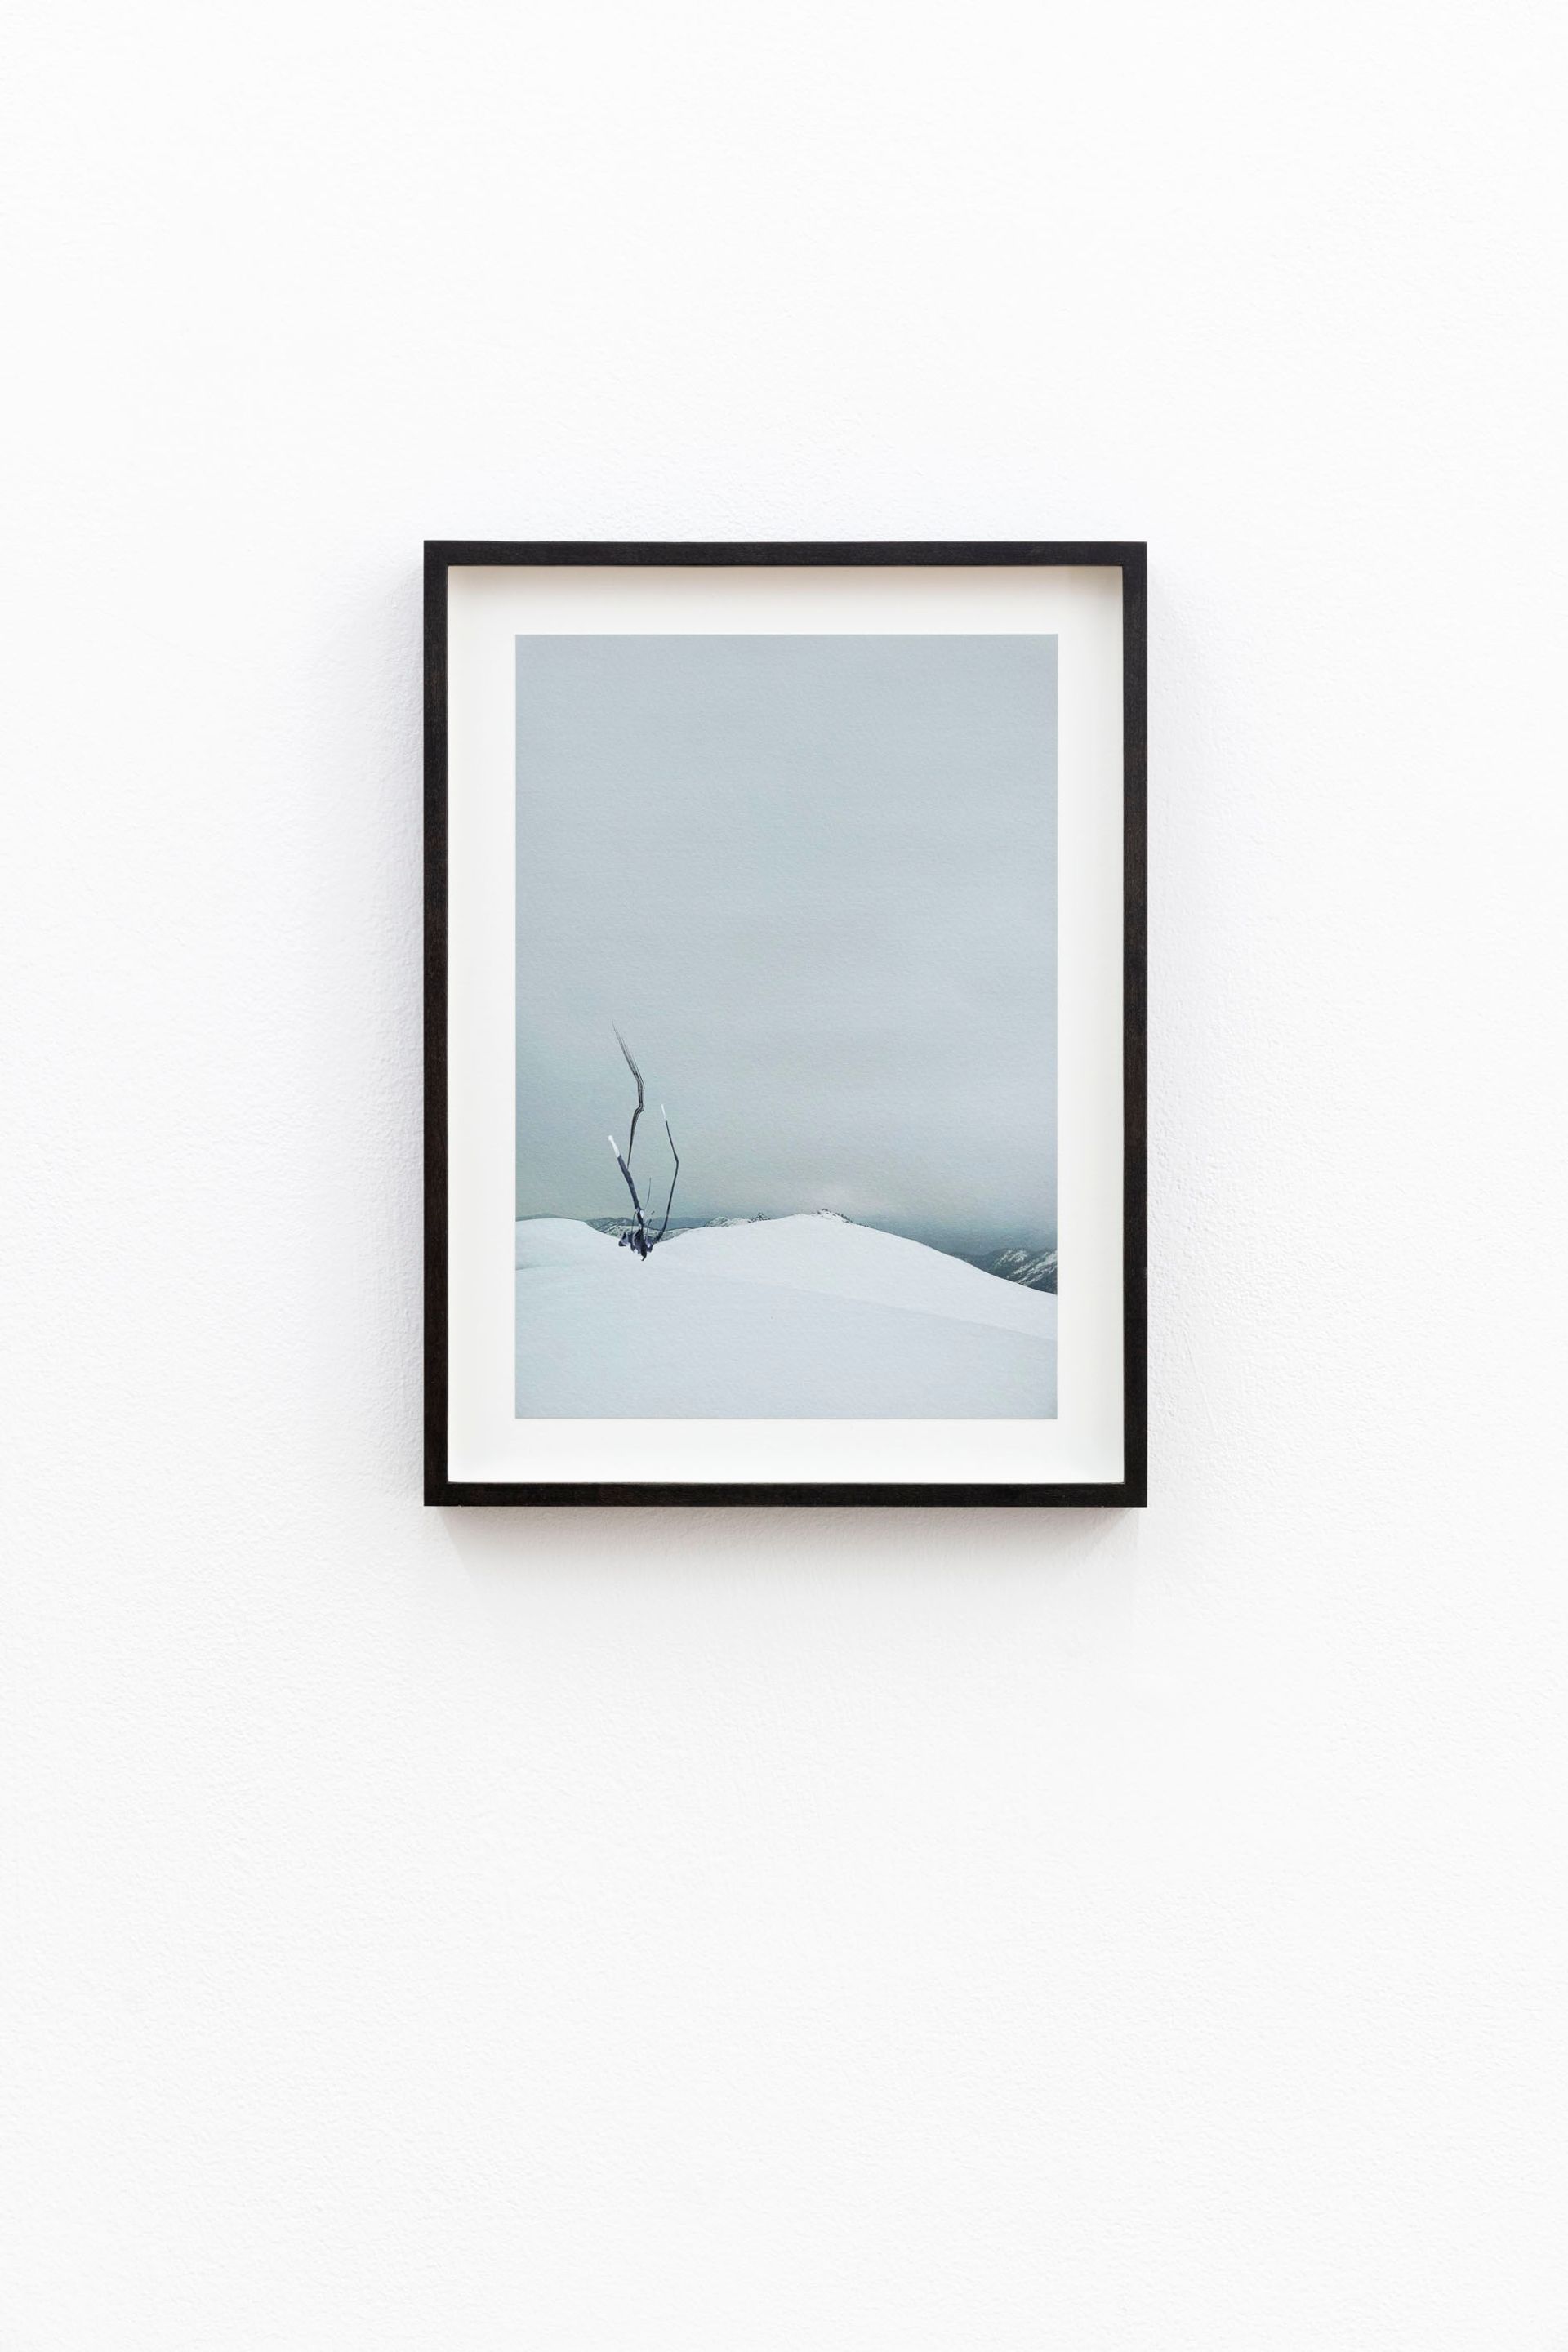 anuri / Wind, 2023, pigment print, ink on watercolor paper, 26 × 18 cm, frame: 31,5 × 23,5 × 2,9 cm